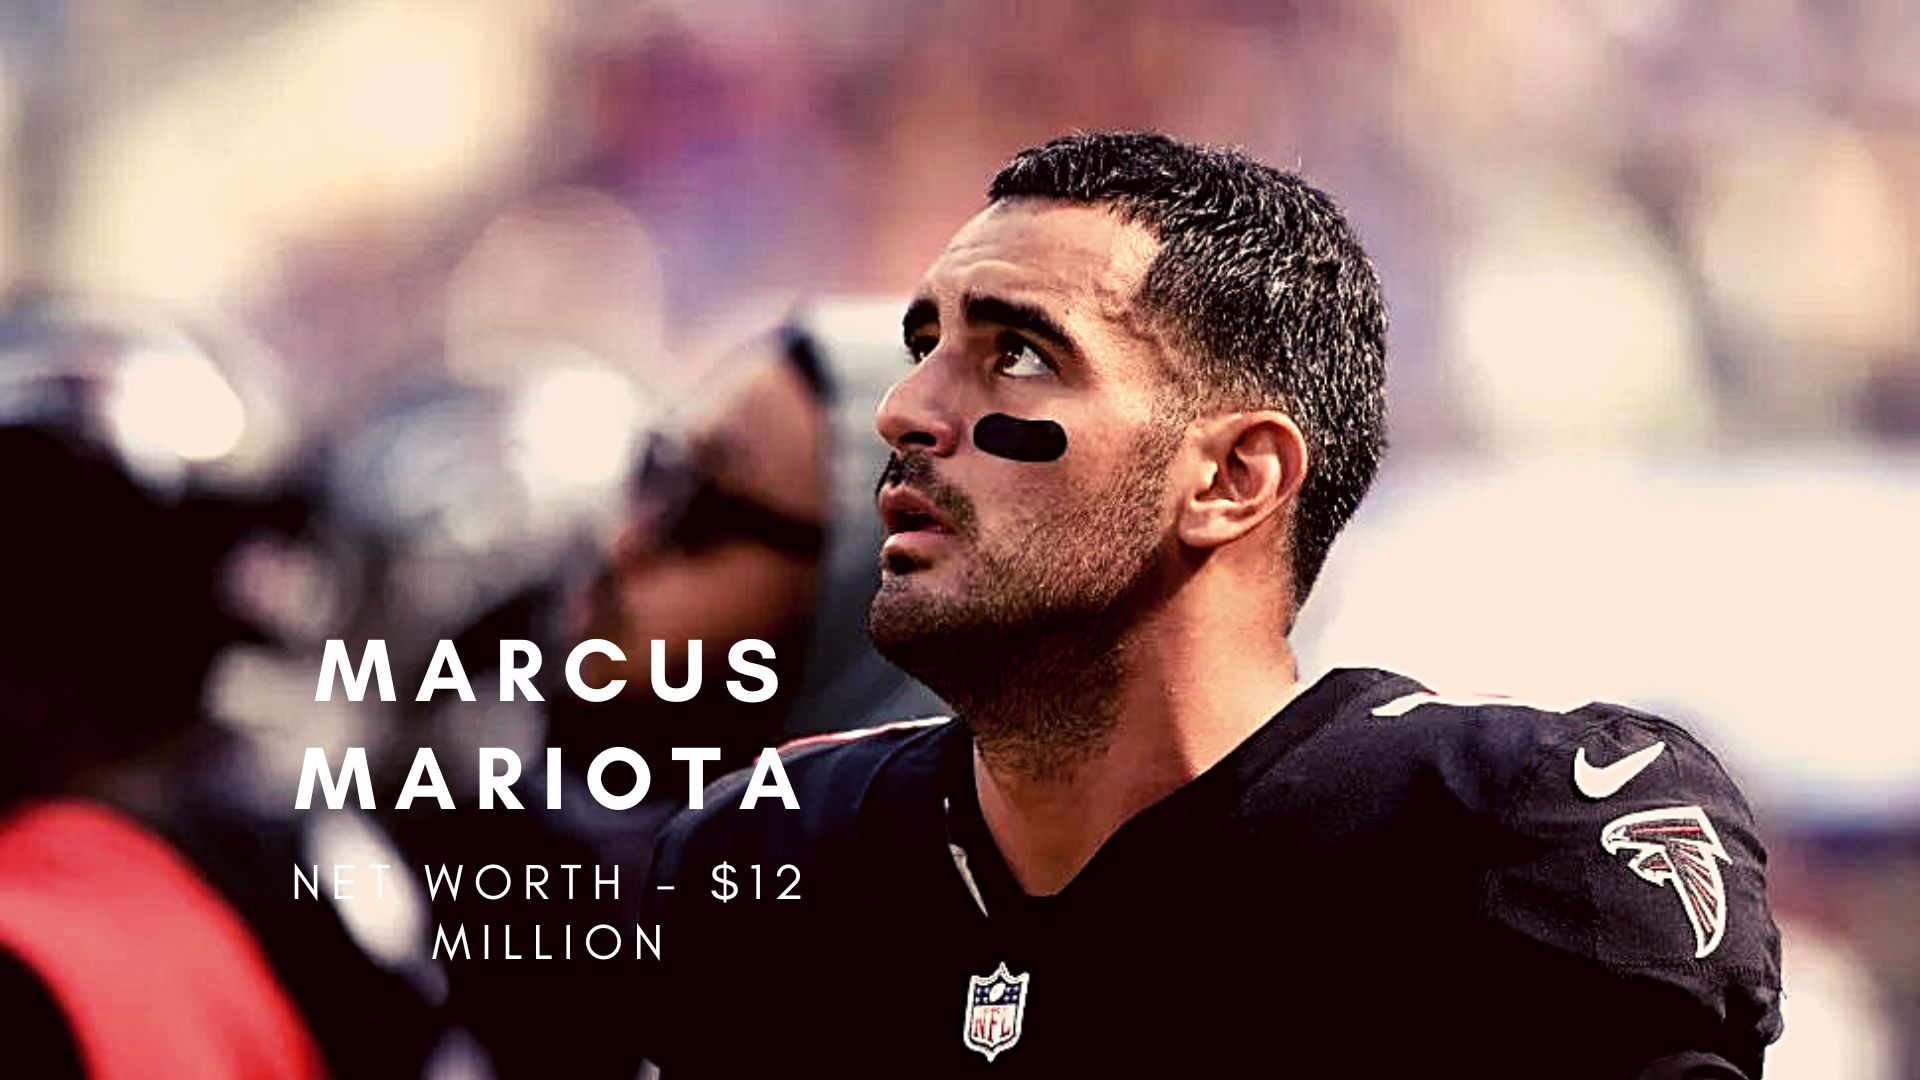 Marcus Mariota Net Worth, Career, Personal Life and Records